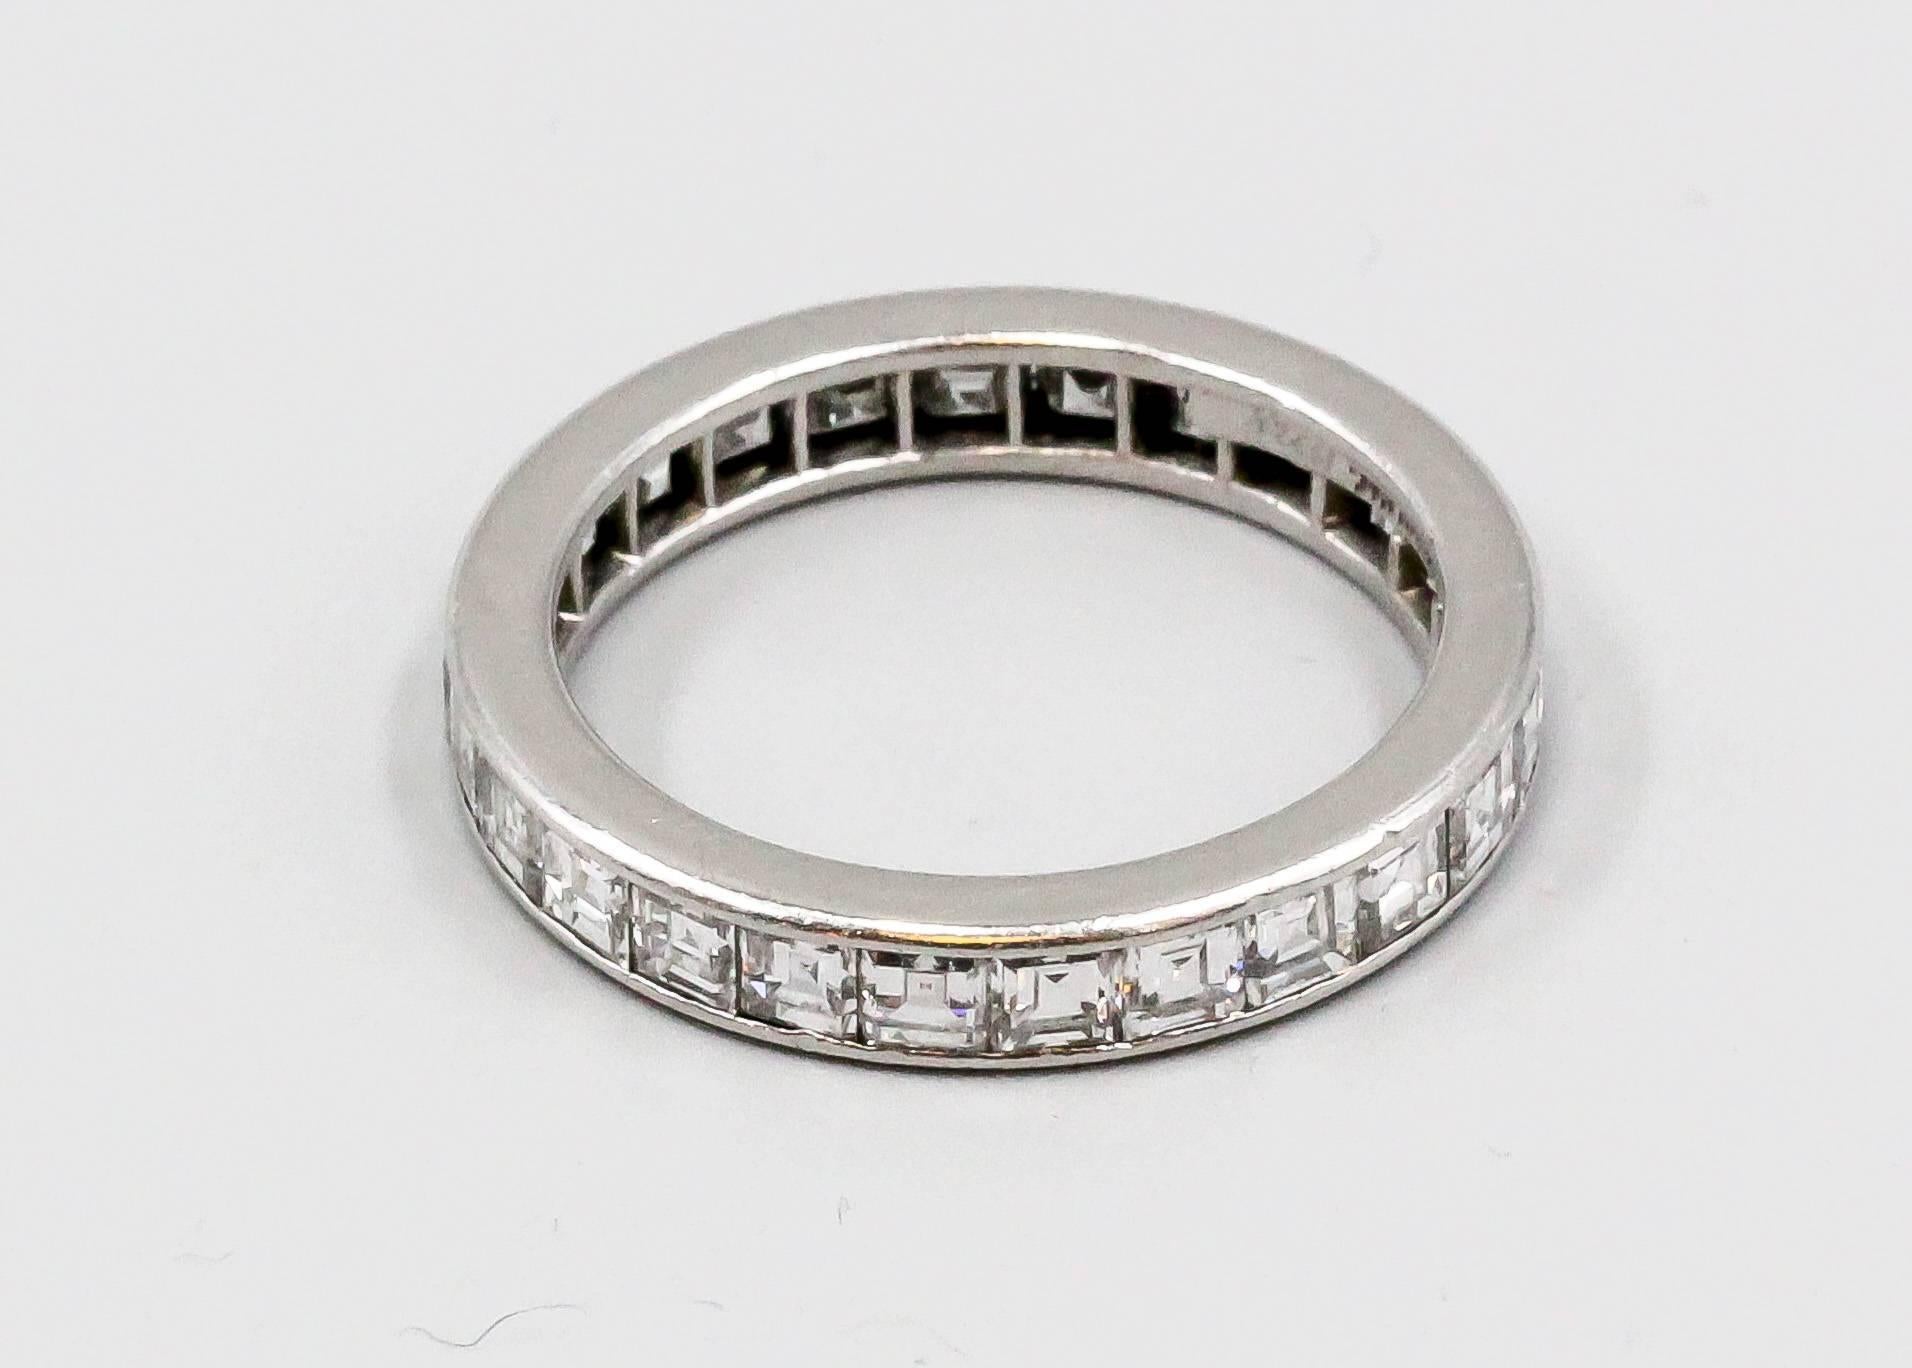 Timeless diamond and platinum band by Tiffany & Co., circa 1970s. It features high grade square cut diamonds, approx 2.5 carats. Great wedding/engagement gift. Excellent workmanship. Size 7.

Hallmarks: Tiffany & Co., Irid Plat.